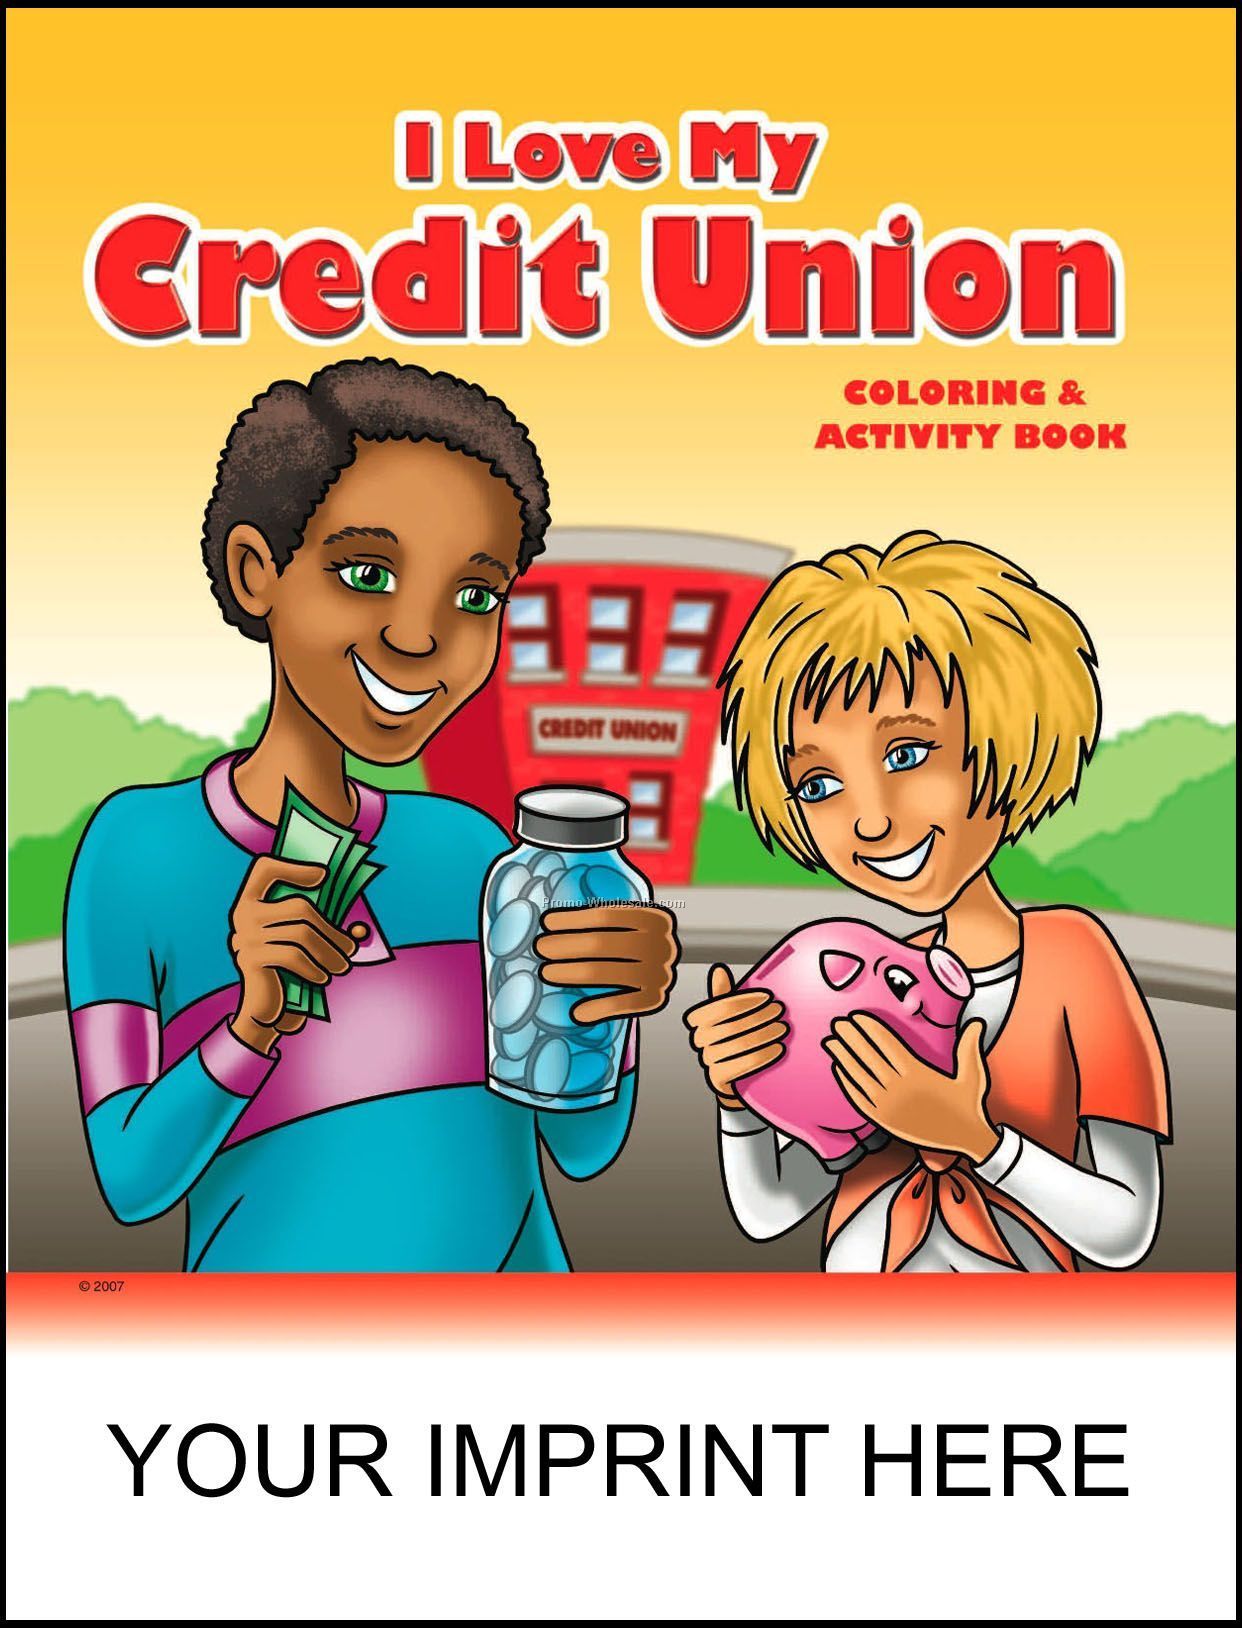 8-3/8"x10-7/8" I Love My Credit Union Coloring & Activity Book